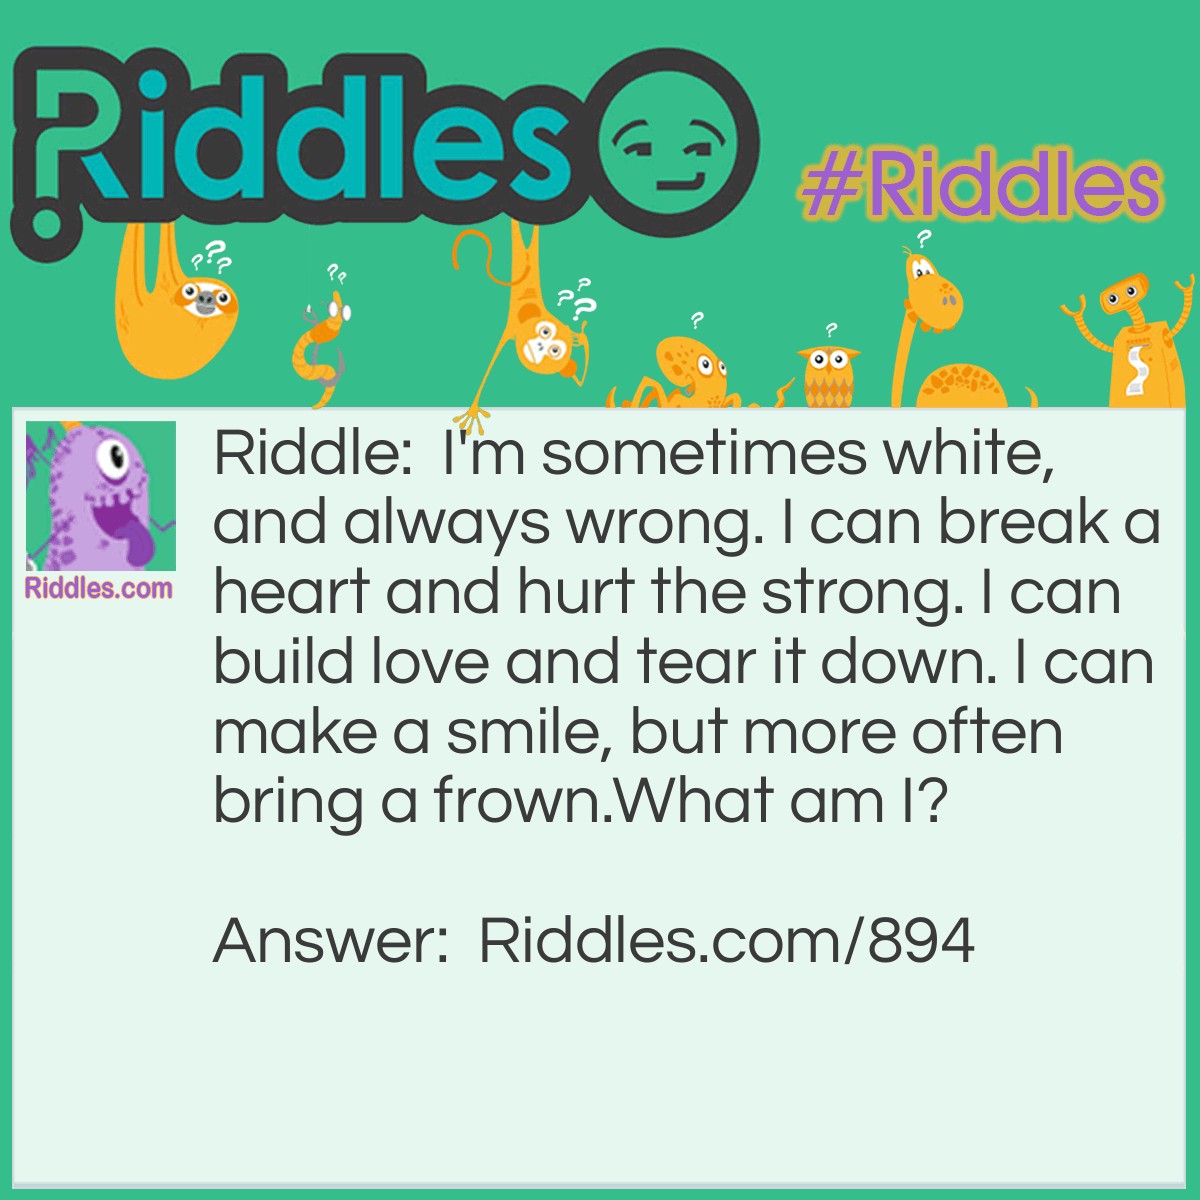 Riddle: I'm sometimes white, and always wrong. I can break a heart and hurt the strong. I can build love and tear it down. I can make a smile, but more often bring a frown.
What am I? Answer: I am a lie.